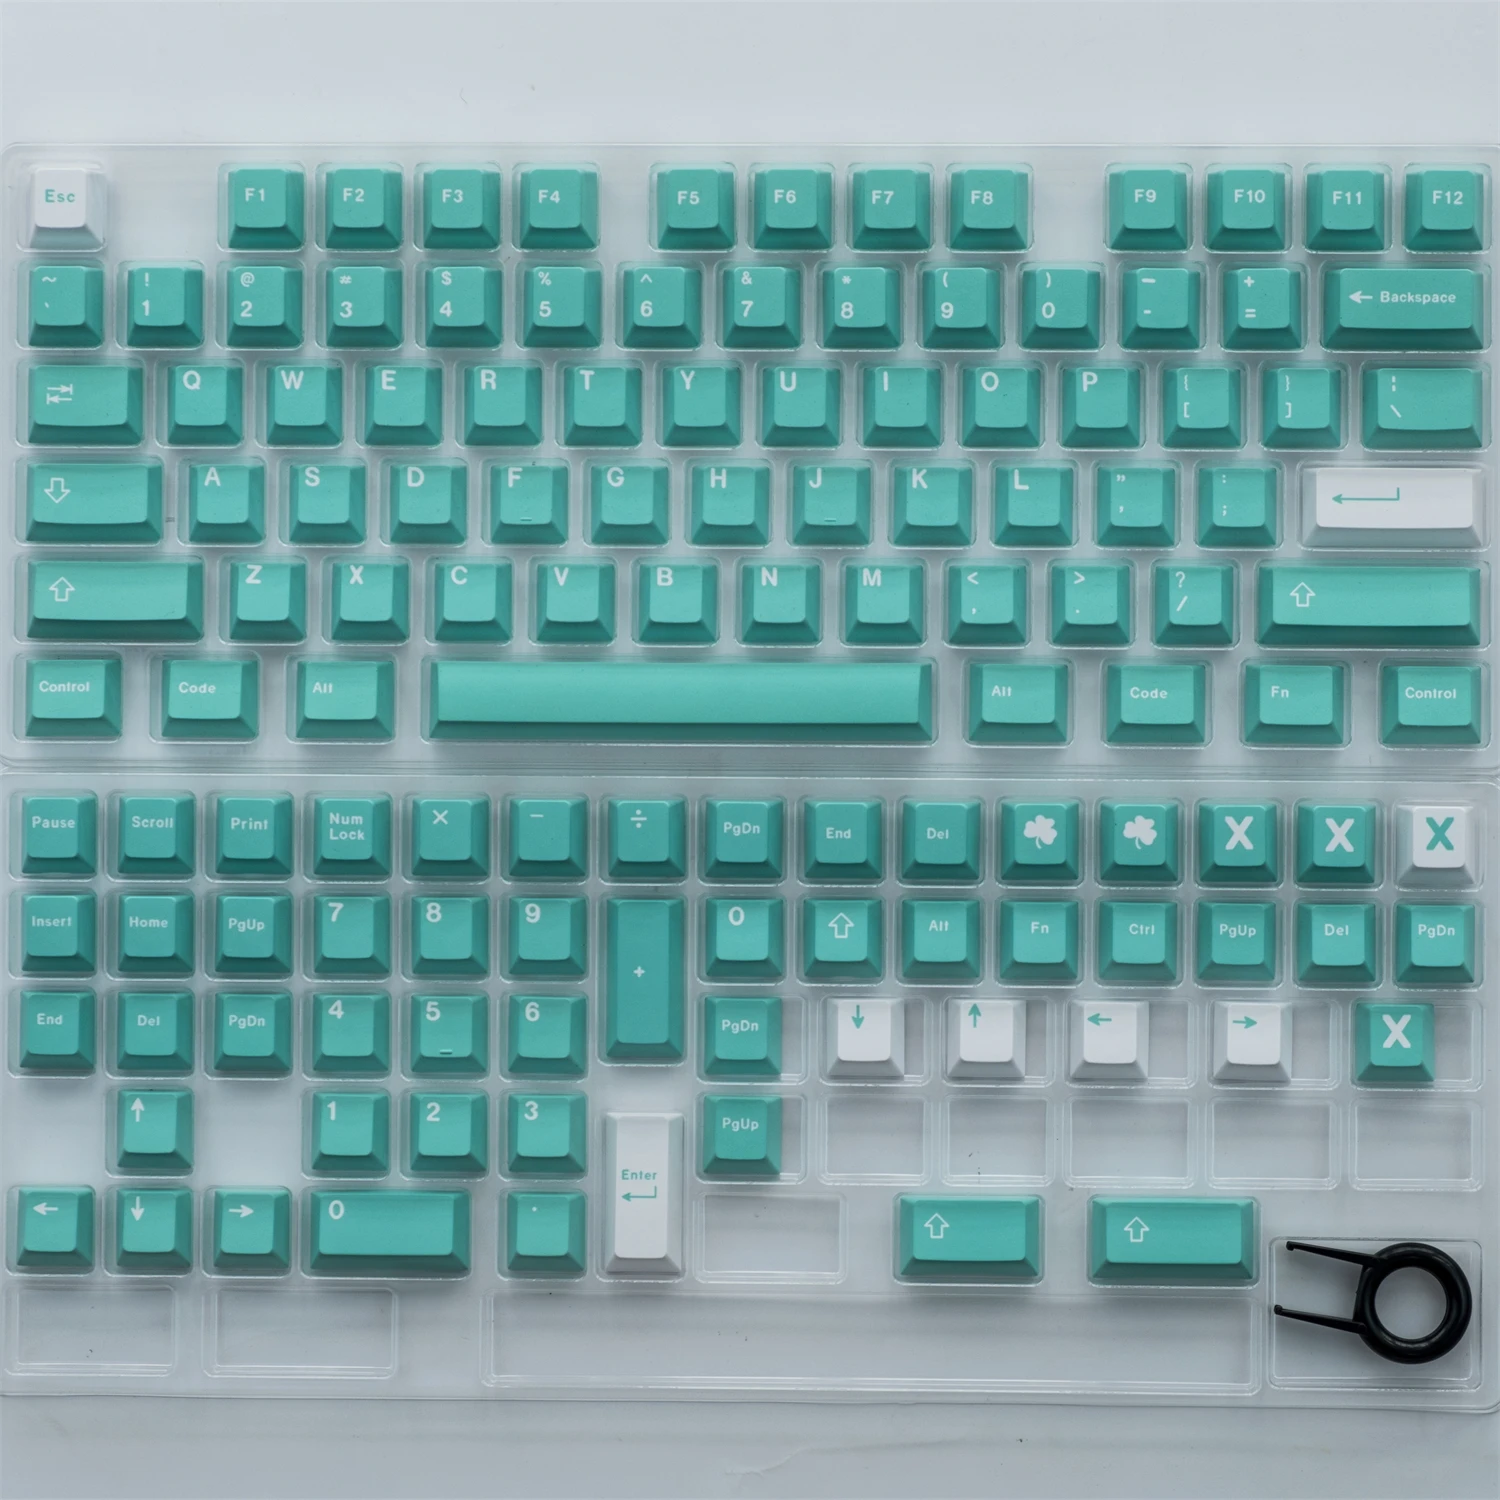 ZHIY Clover Keycap PBT Cherry Profile DYE-SUB Personalized Keyboard Keycap For MX Switch 61 64 68 87 96 104Mechanical Keyboard images - 6